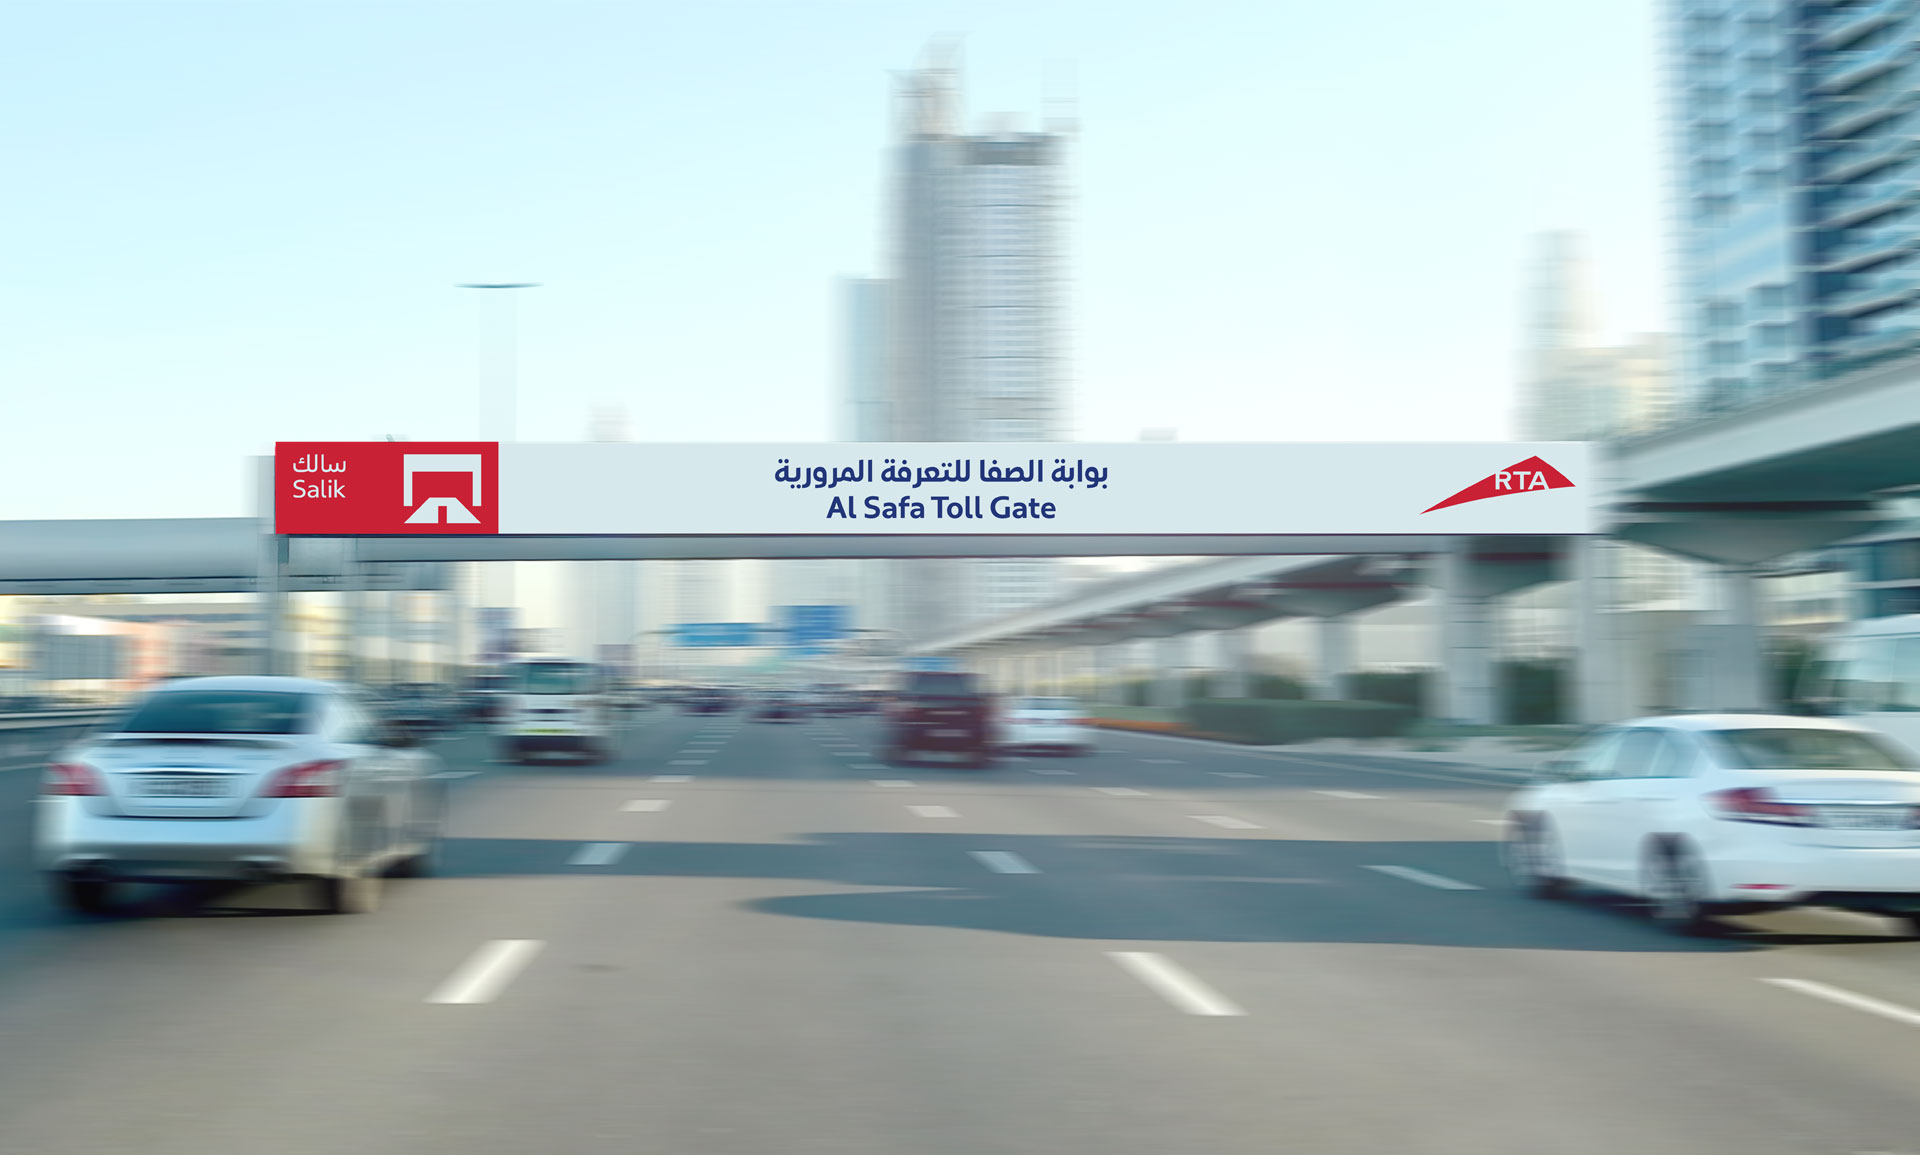 and so we design RTA Project Salik overpass ad